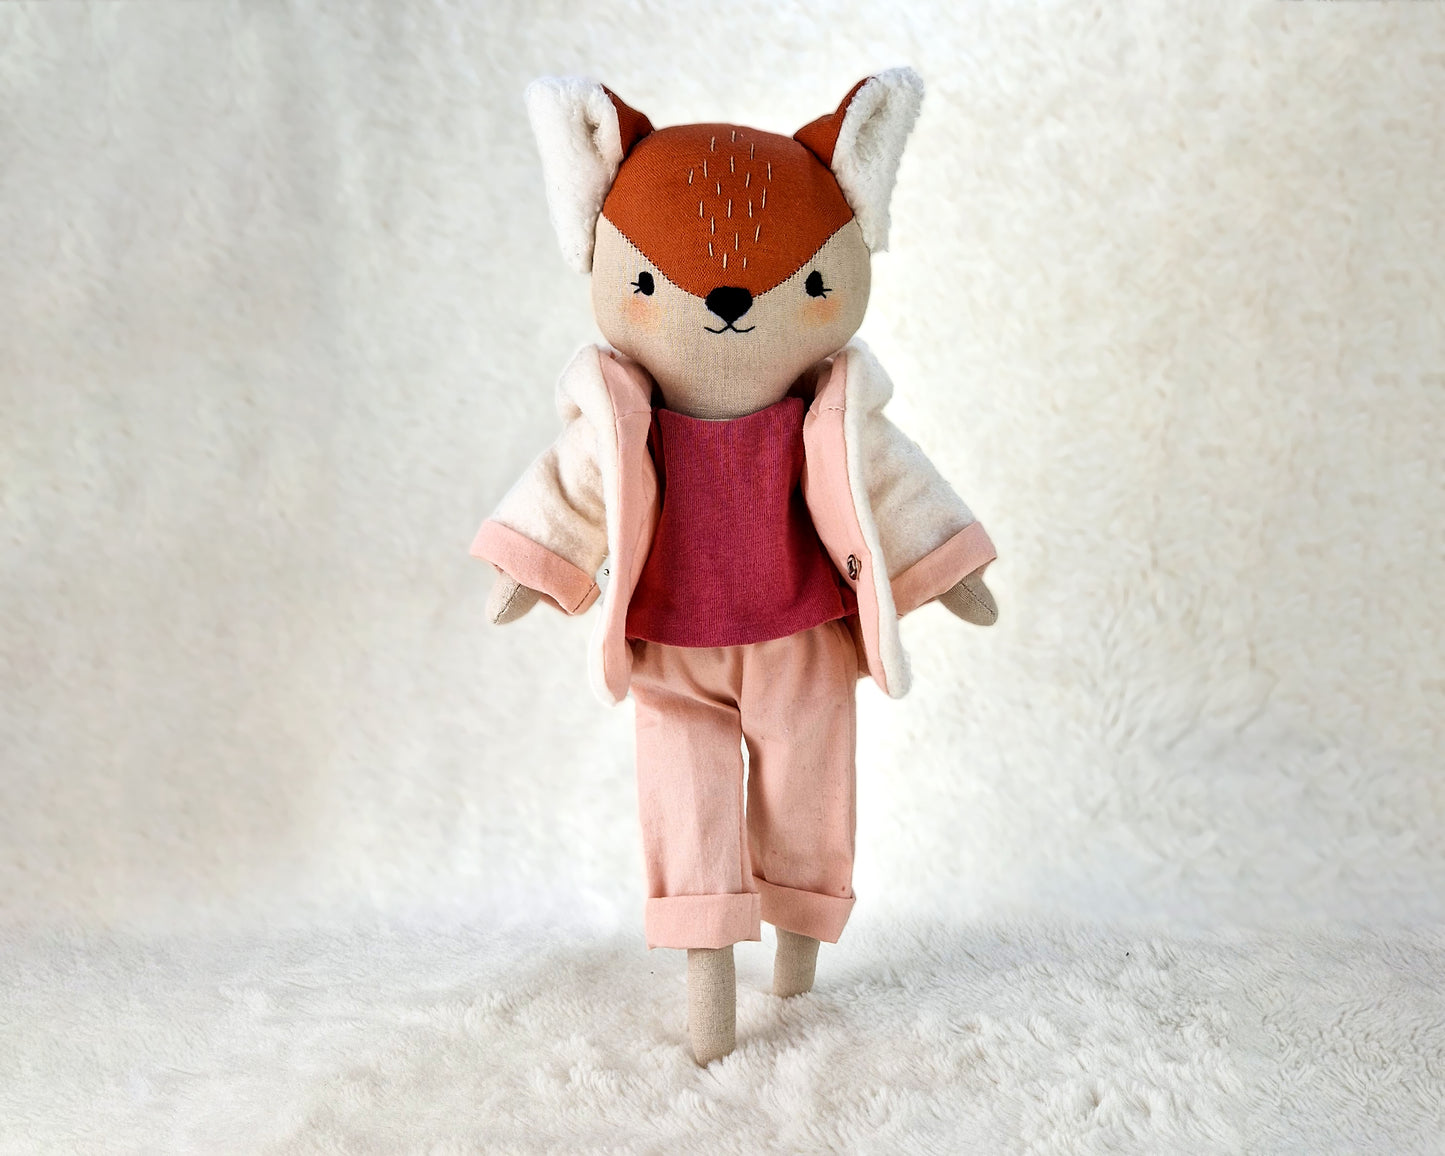 Forest doll set Bunny, Bear and Fox - PDF sewing pattern and tutorial